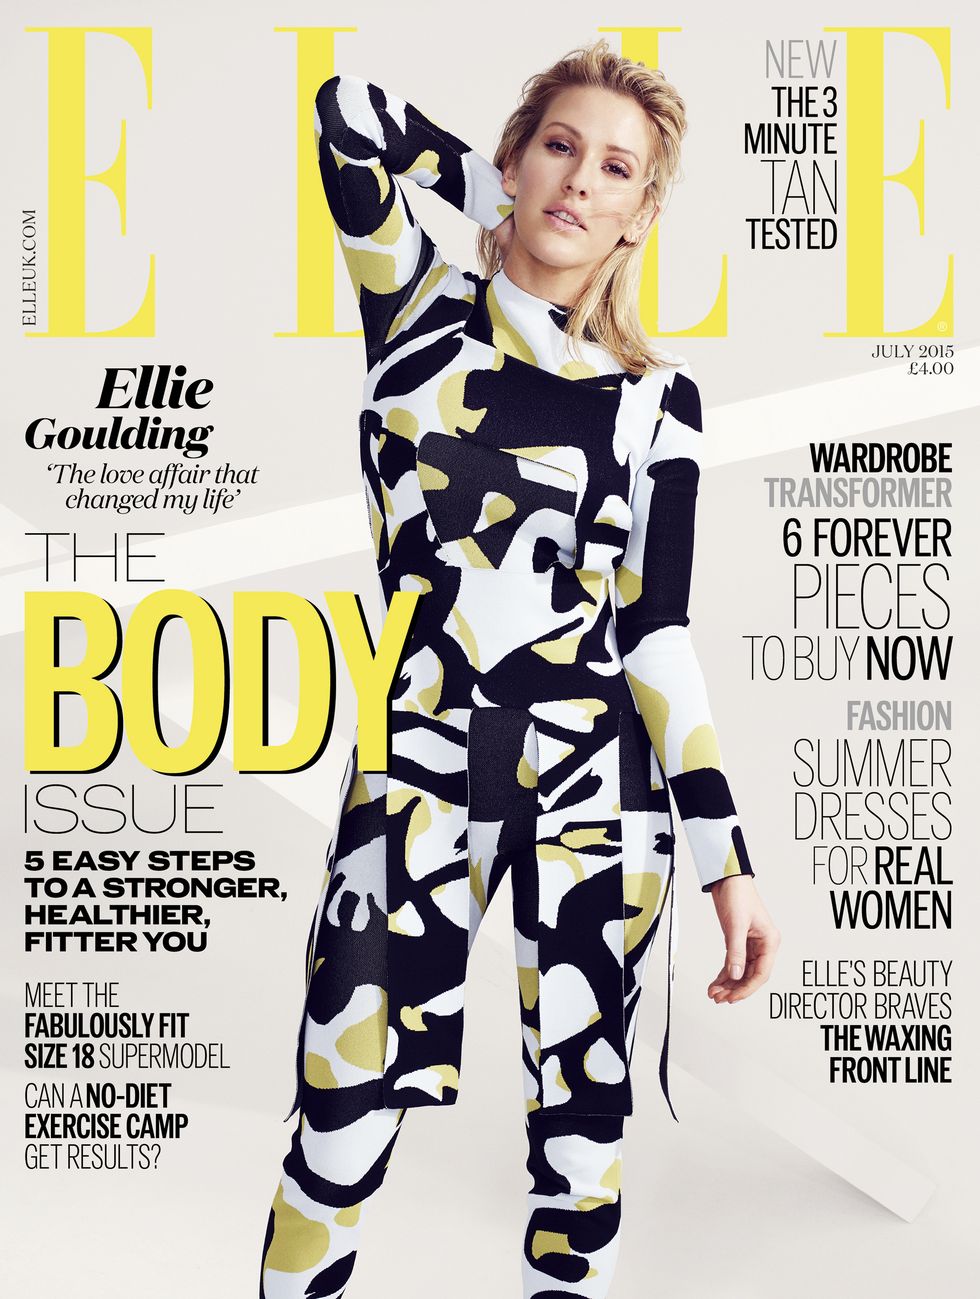 Ellie Goulding on the cover of Elle Magazine